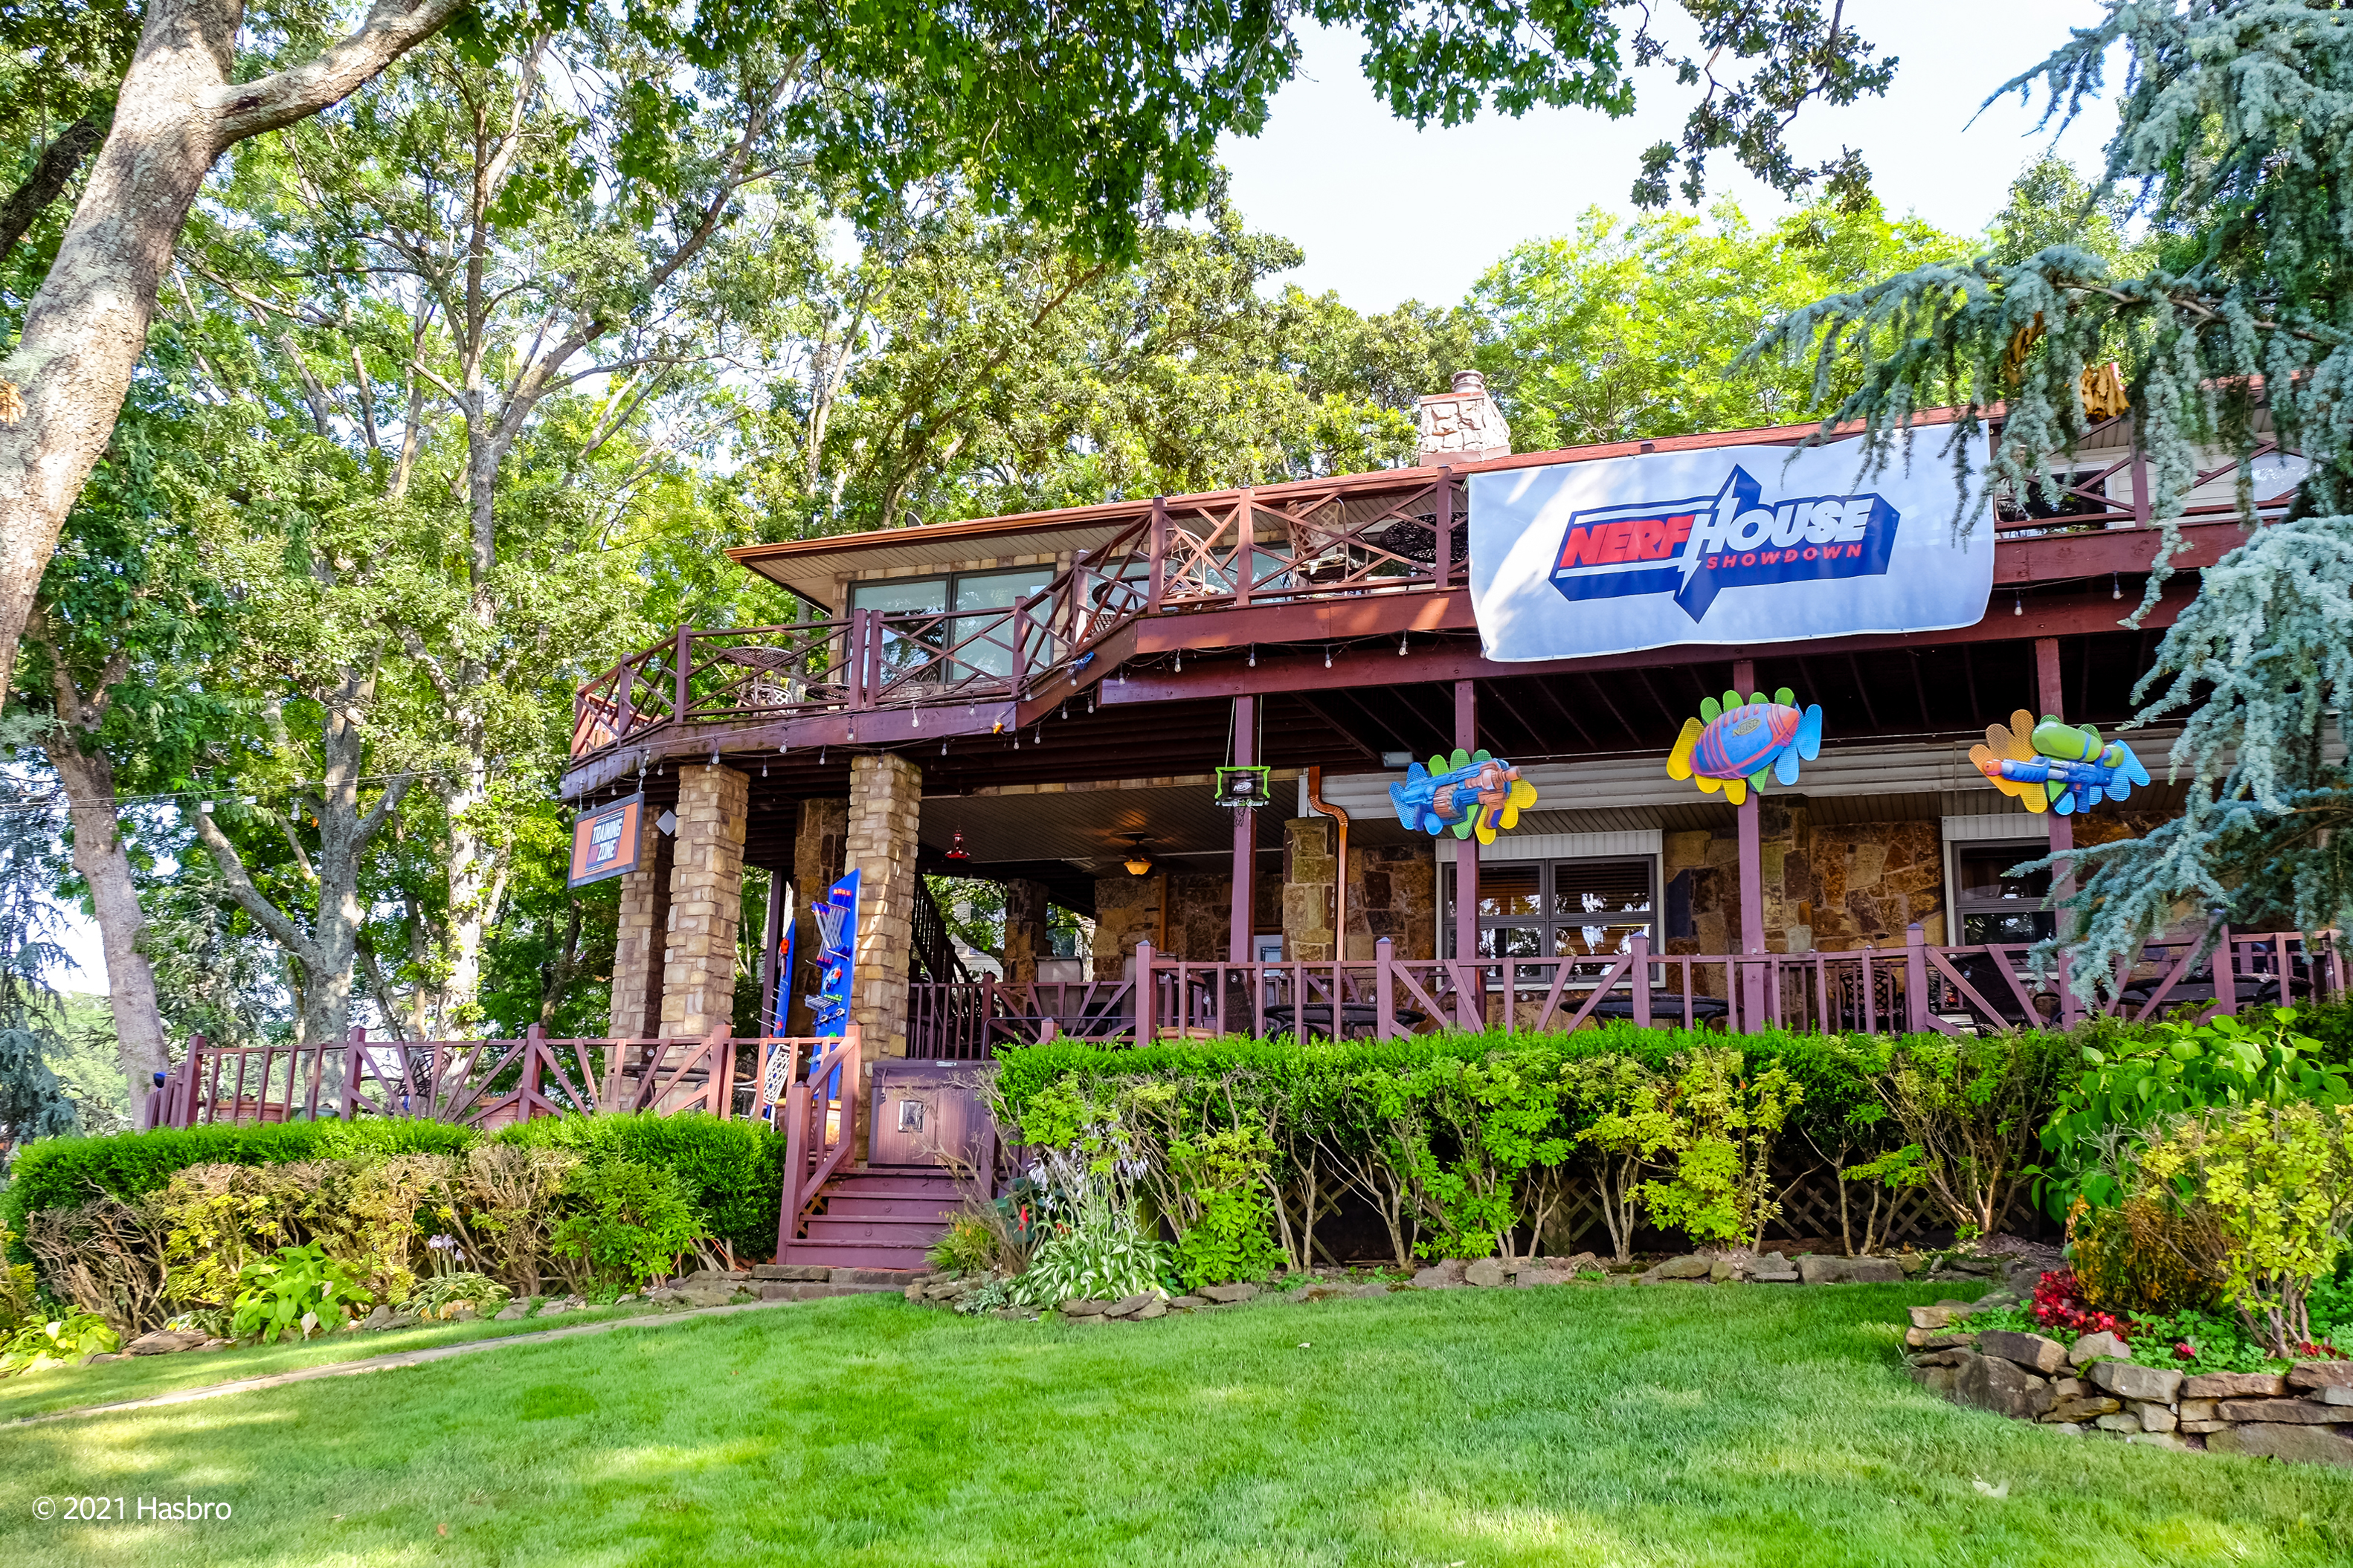 Vrbo and Hasbro team up to offer the chance to book decked out lake house featured in new season of “NERF HOUSE SHOWDOWN” series